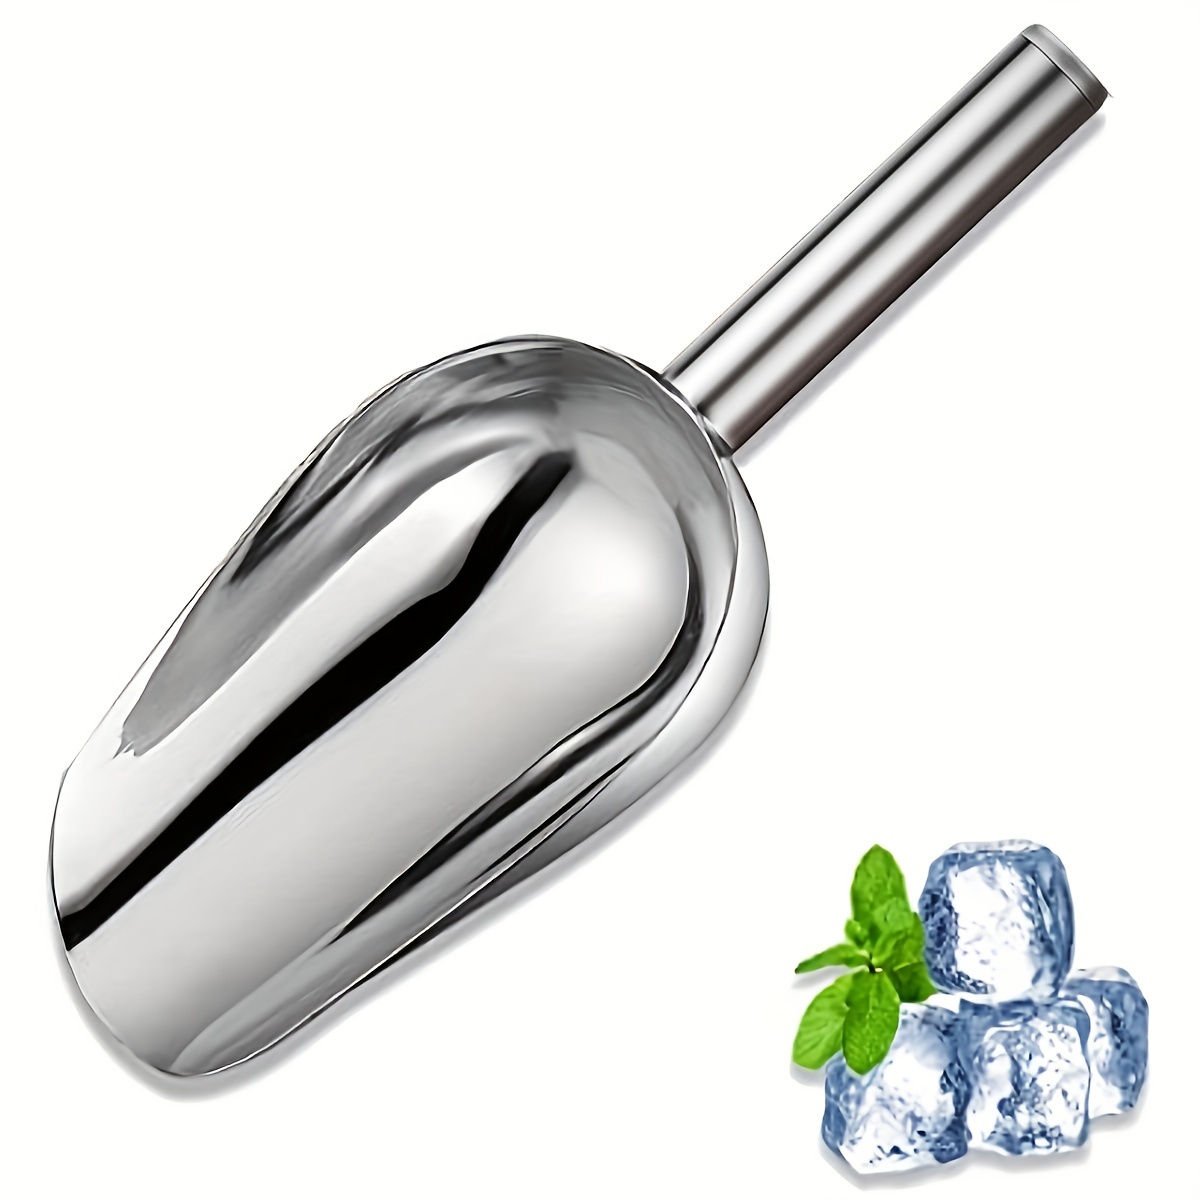 Ice Scoop ,small Stainless Steel Scoops For Ice Cube/candy/flour/sugar,  Metal Utility Scoops For Canisters, Baking 1pcs-silver